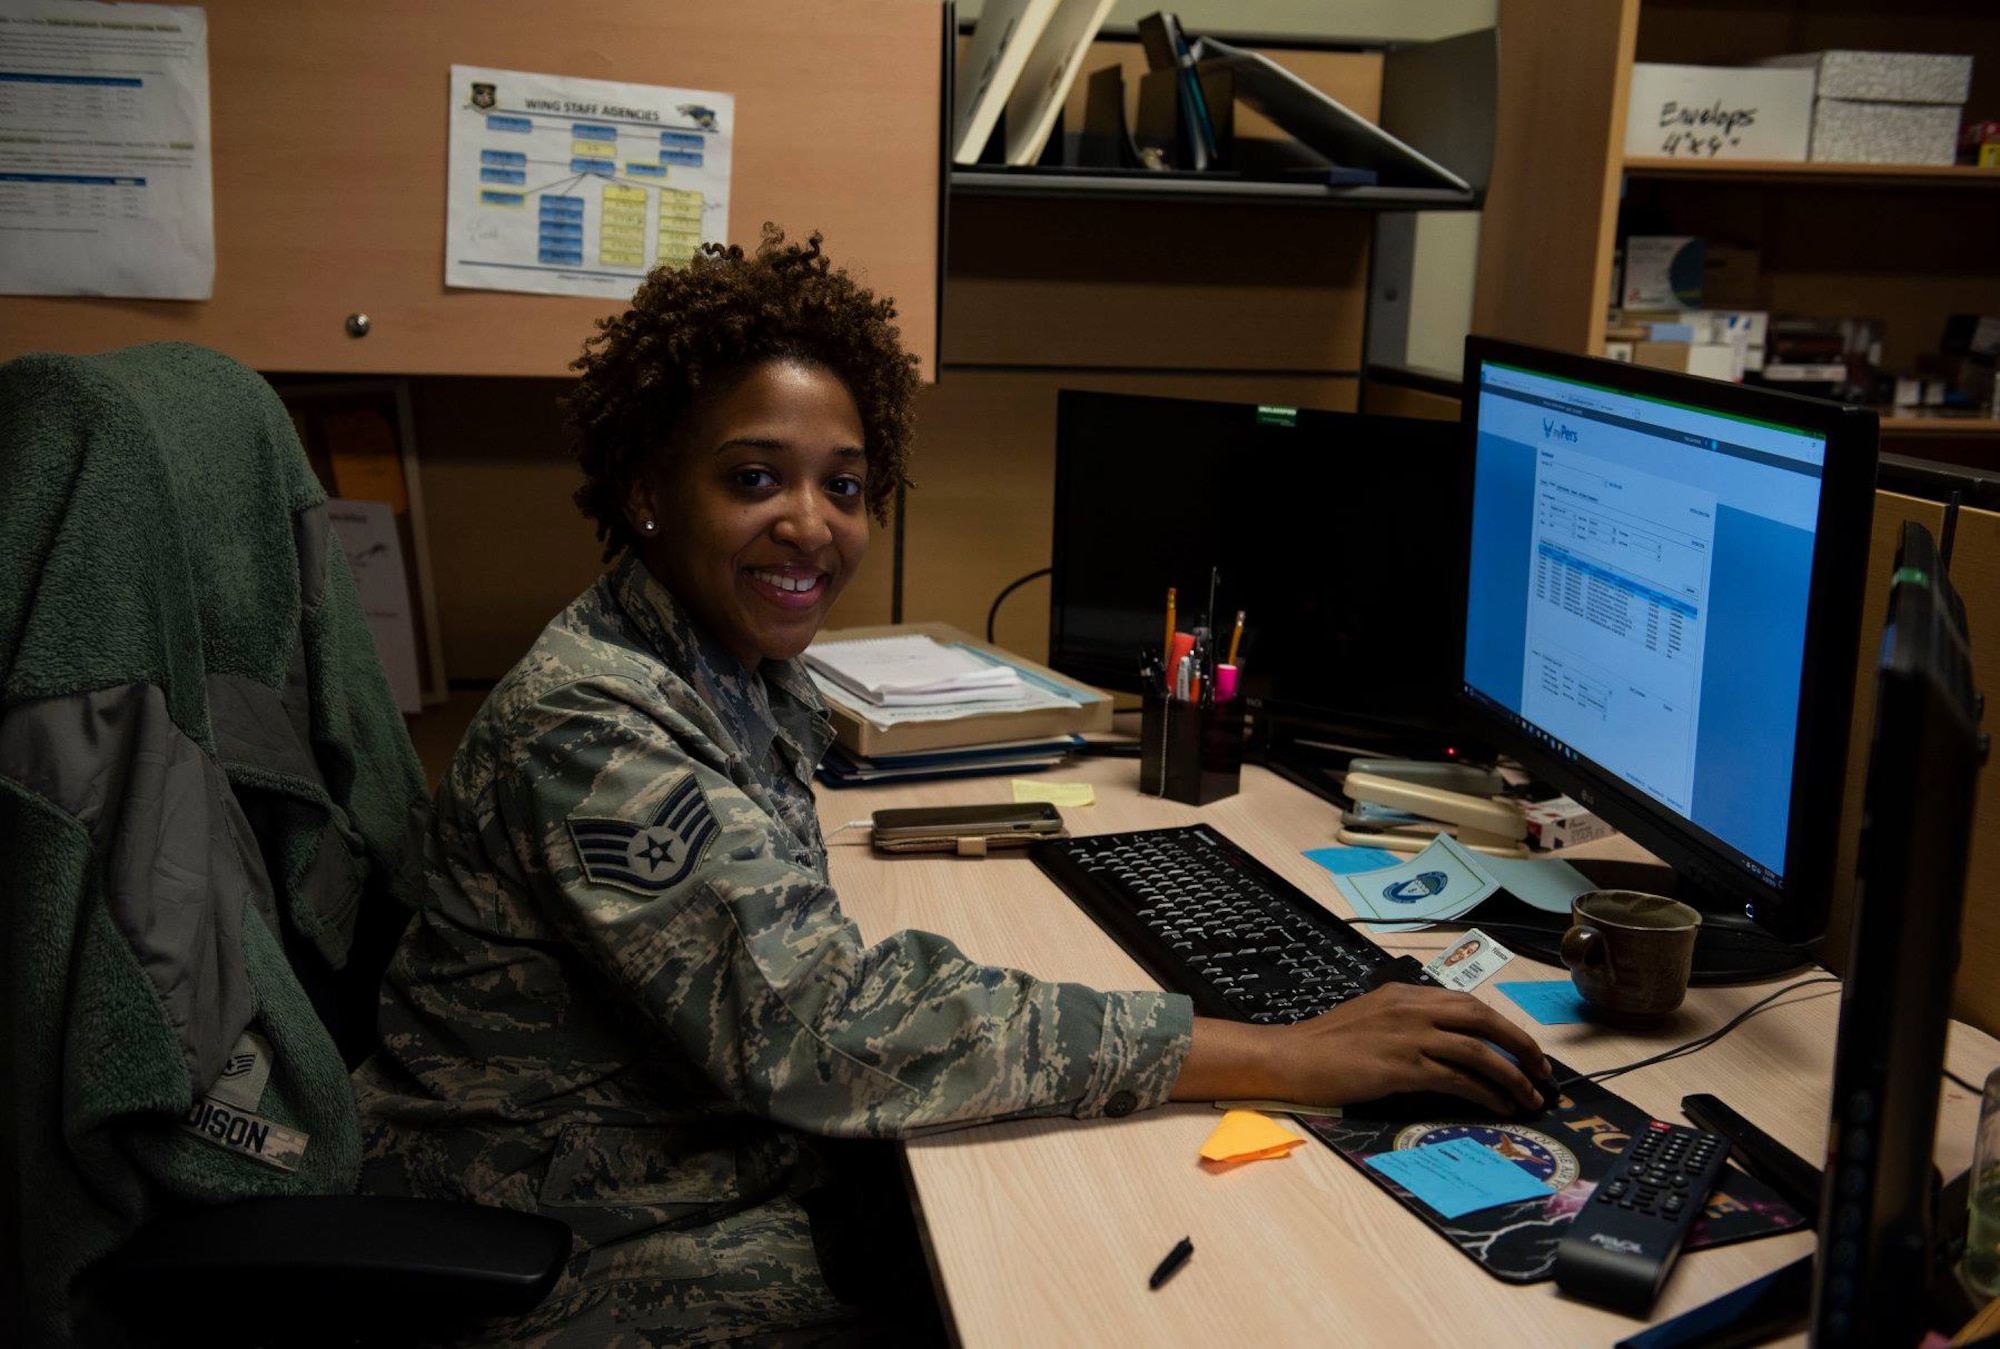 U.S. Air Force Staff Sgt. Jasmine Madison, 8th Comptroller Squadron command support staff, poses for a picture at Kunsan Air Base, Republic of Korea, Feb. 27, 2019. Madison was named the Brigadier General Wilma Vaught Visionary Leadership Award for her work on and off duty at Kunsan Air Base. (U.S. Air Force photo by Senior Airman Savannah Waters)